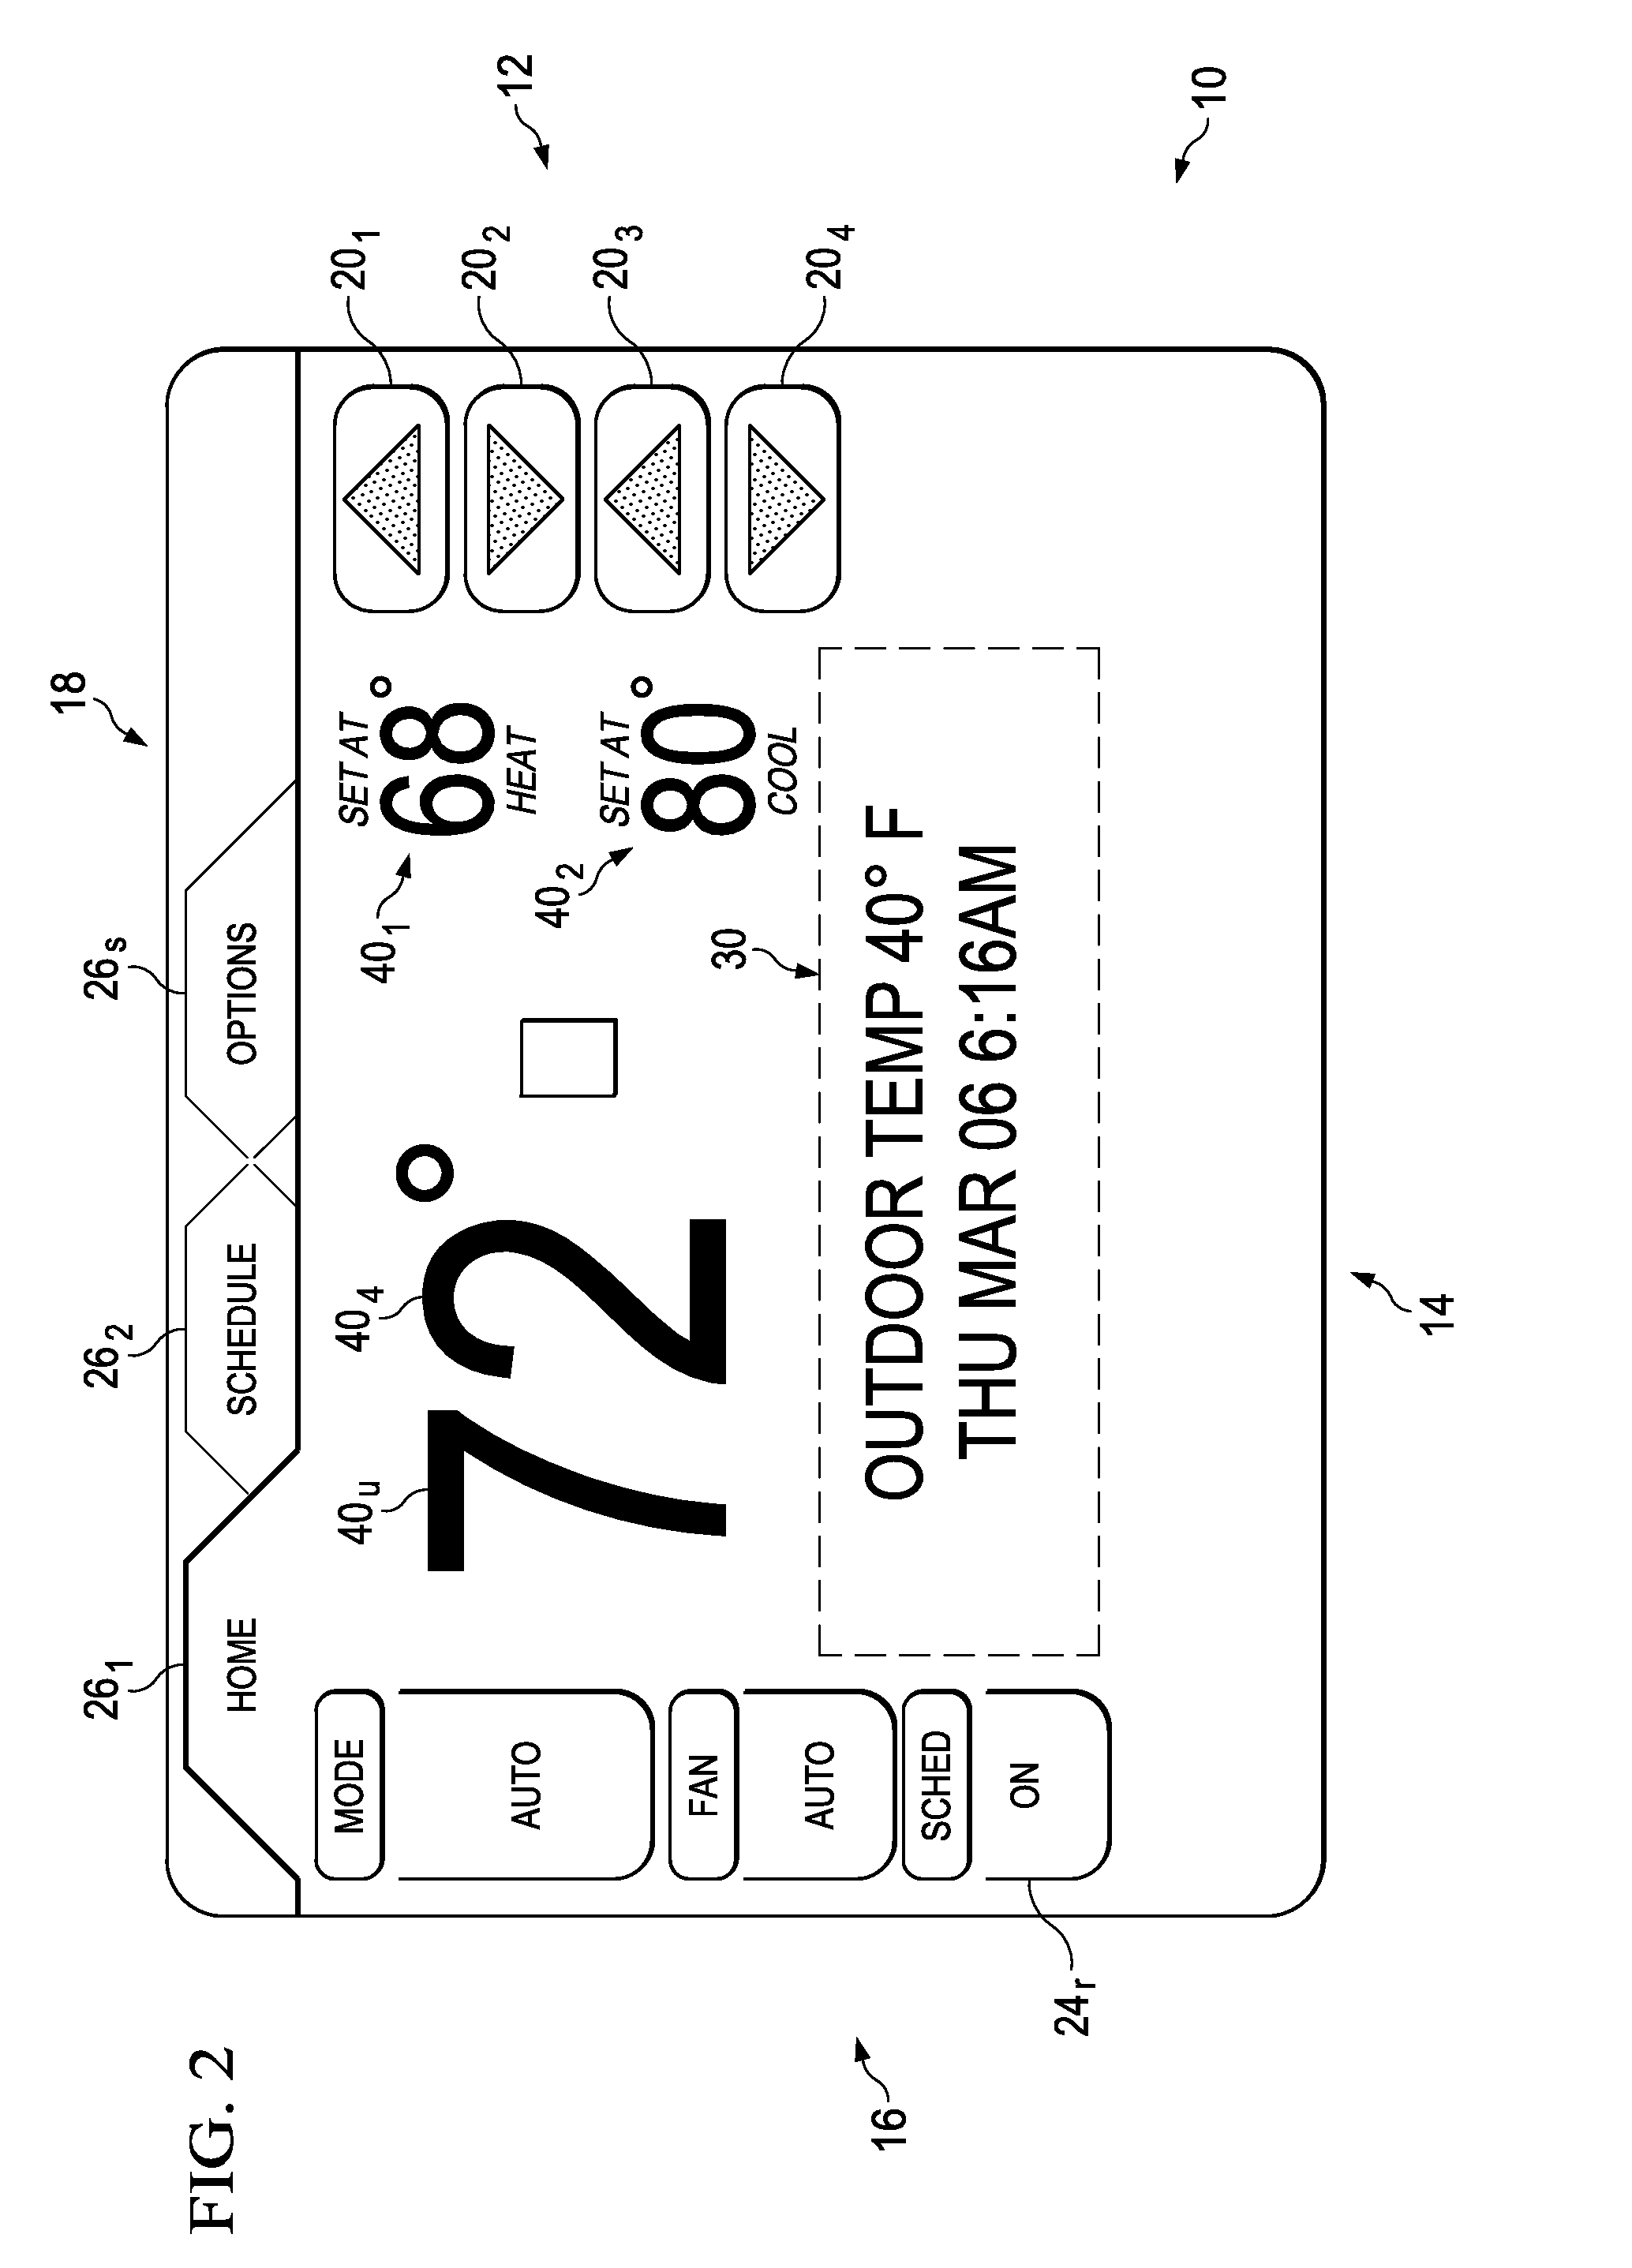 Display apparatus and method having multiple day programming capability for an environmental control system